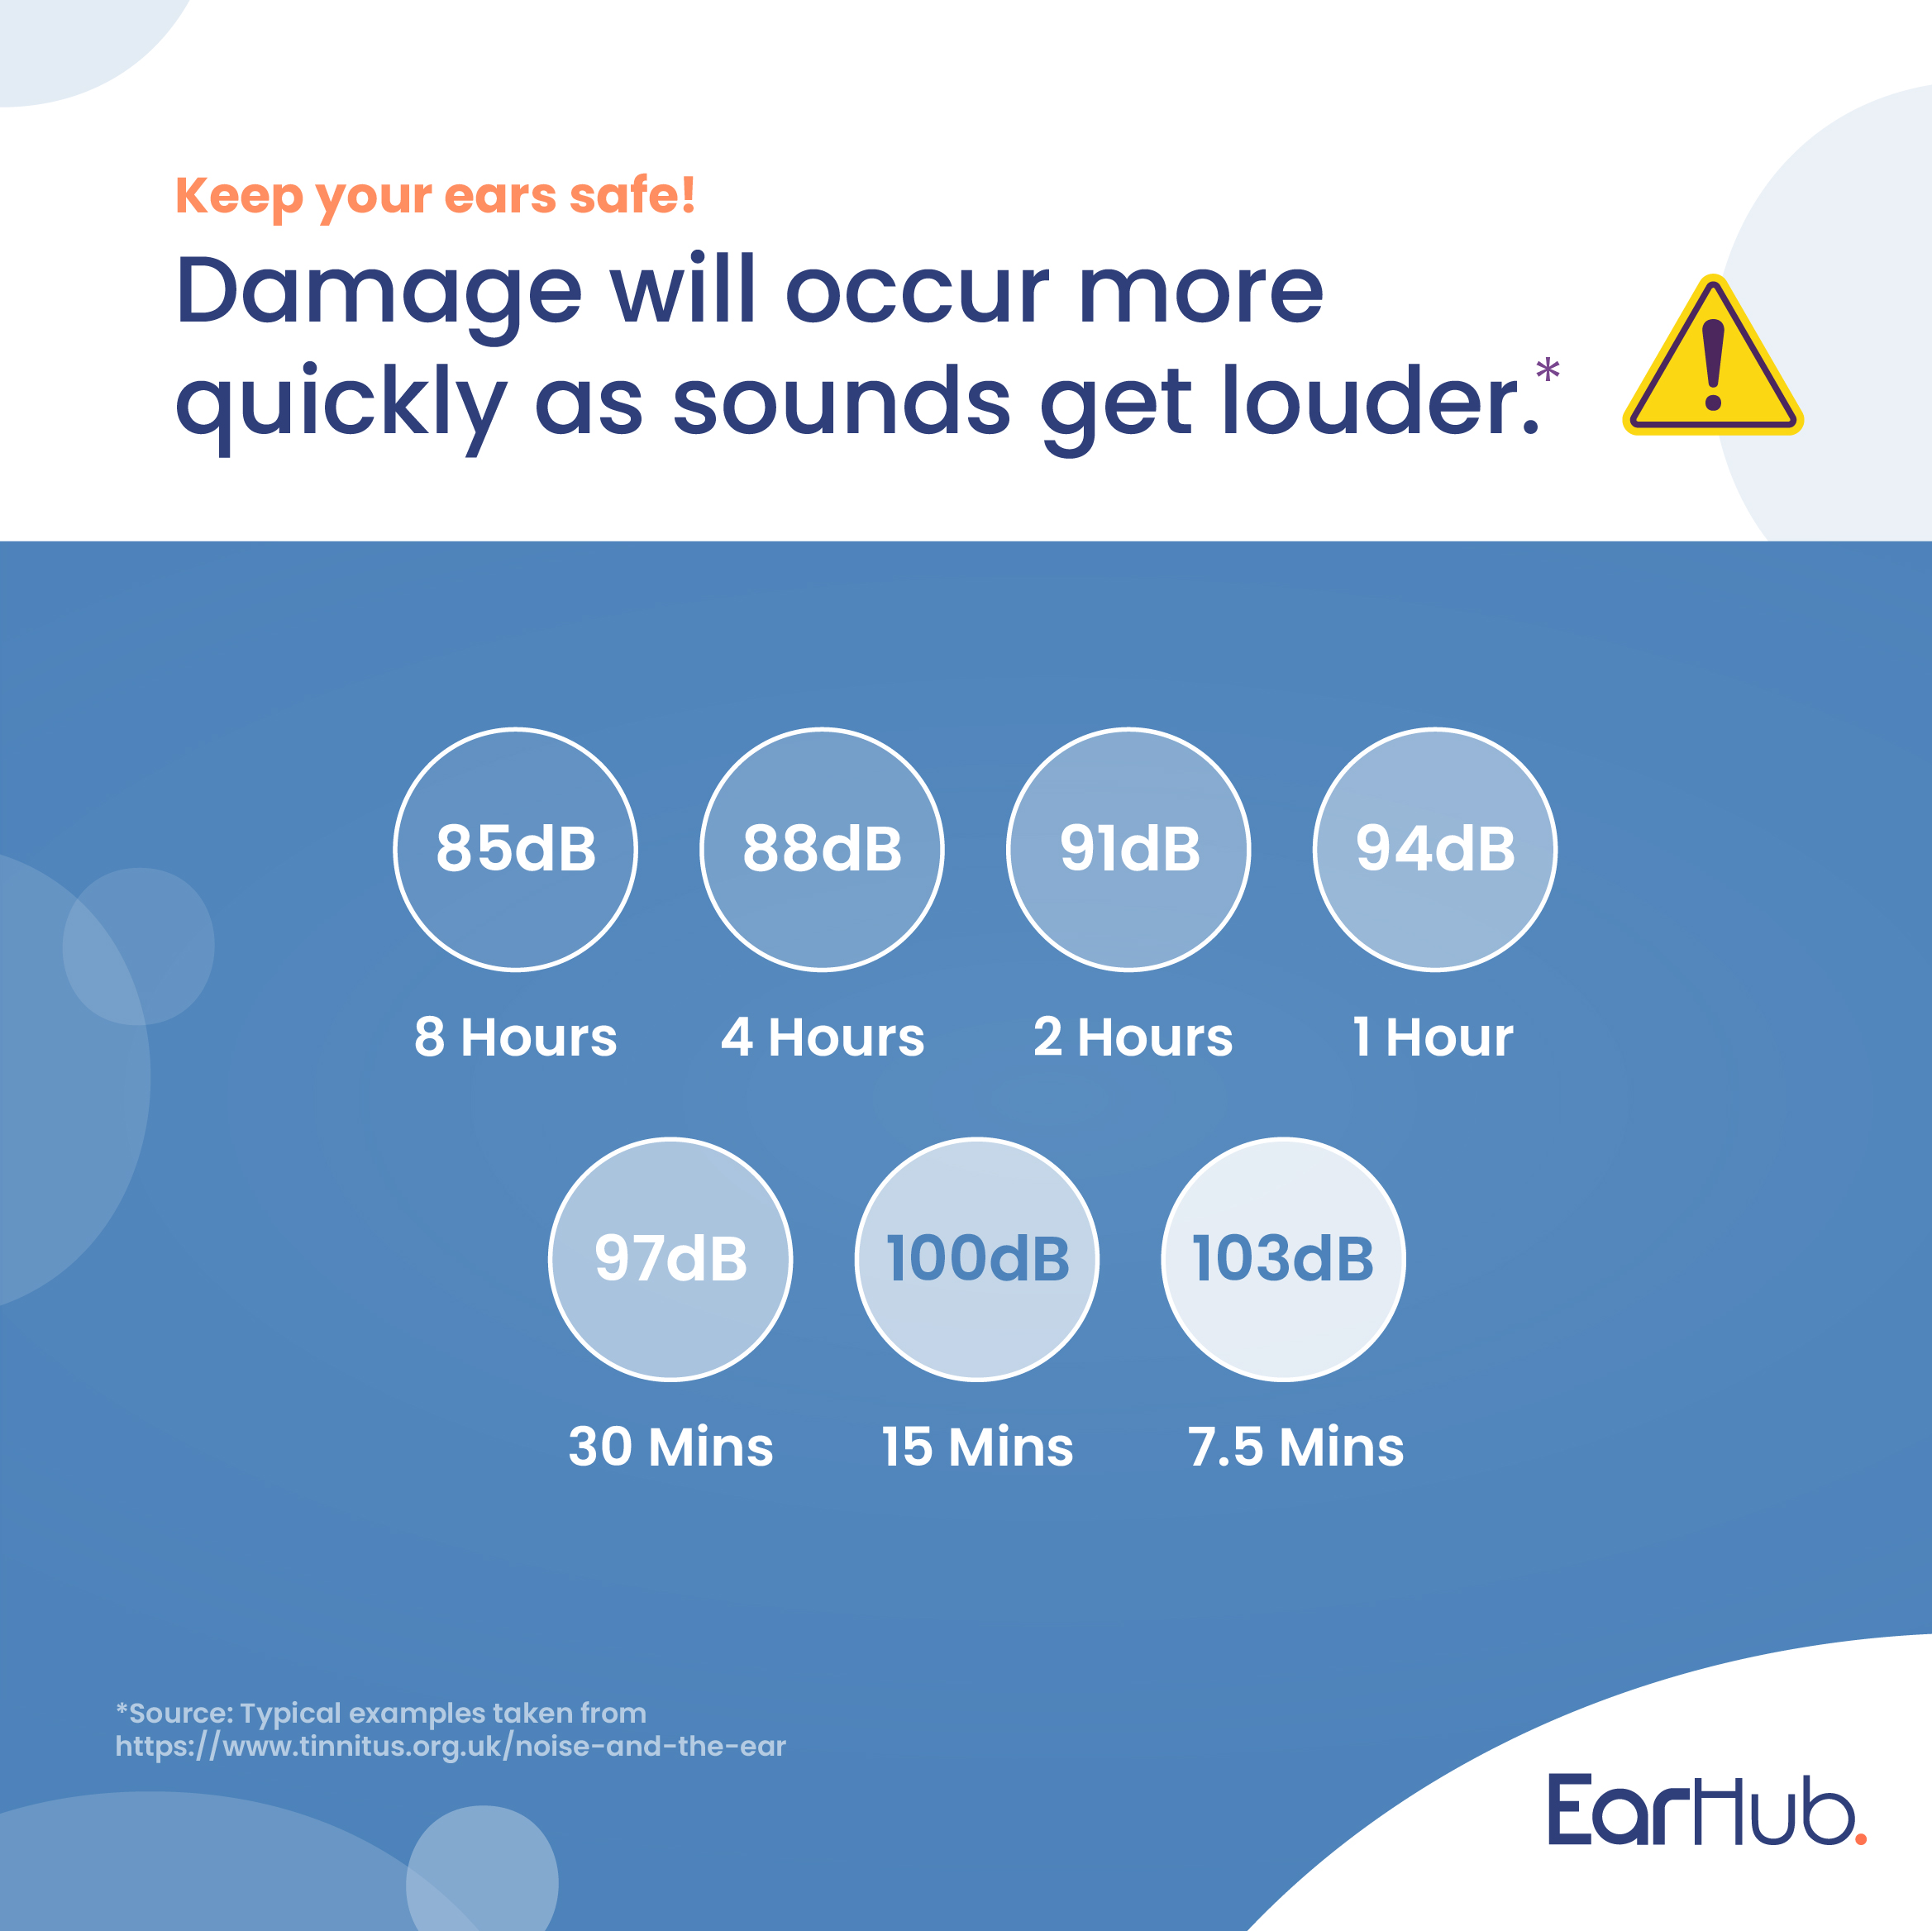 Damage can occur more quickly as sounds get louder. Sounds above 85dB are harmful to your ears.